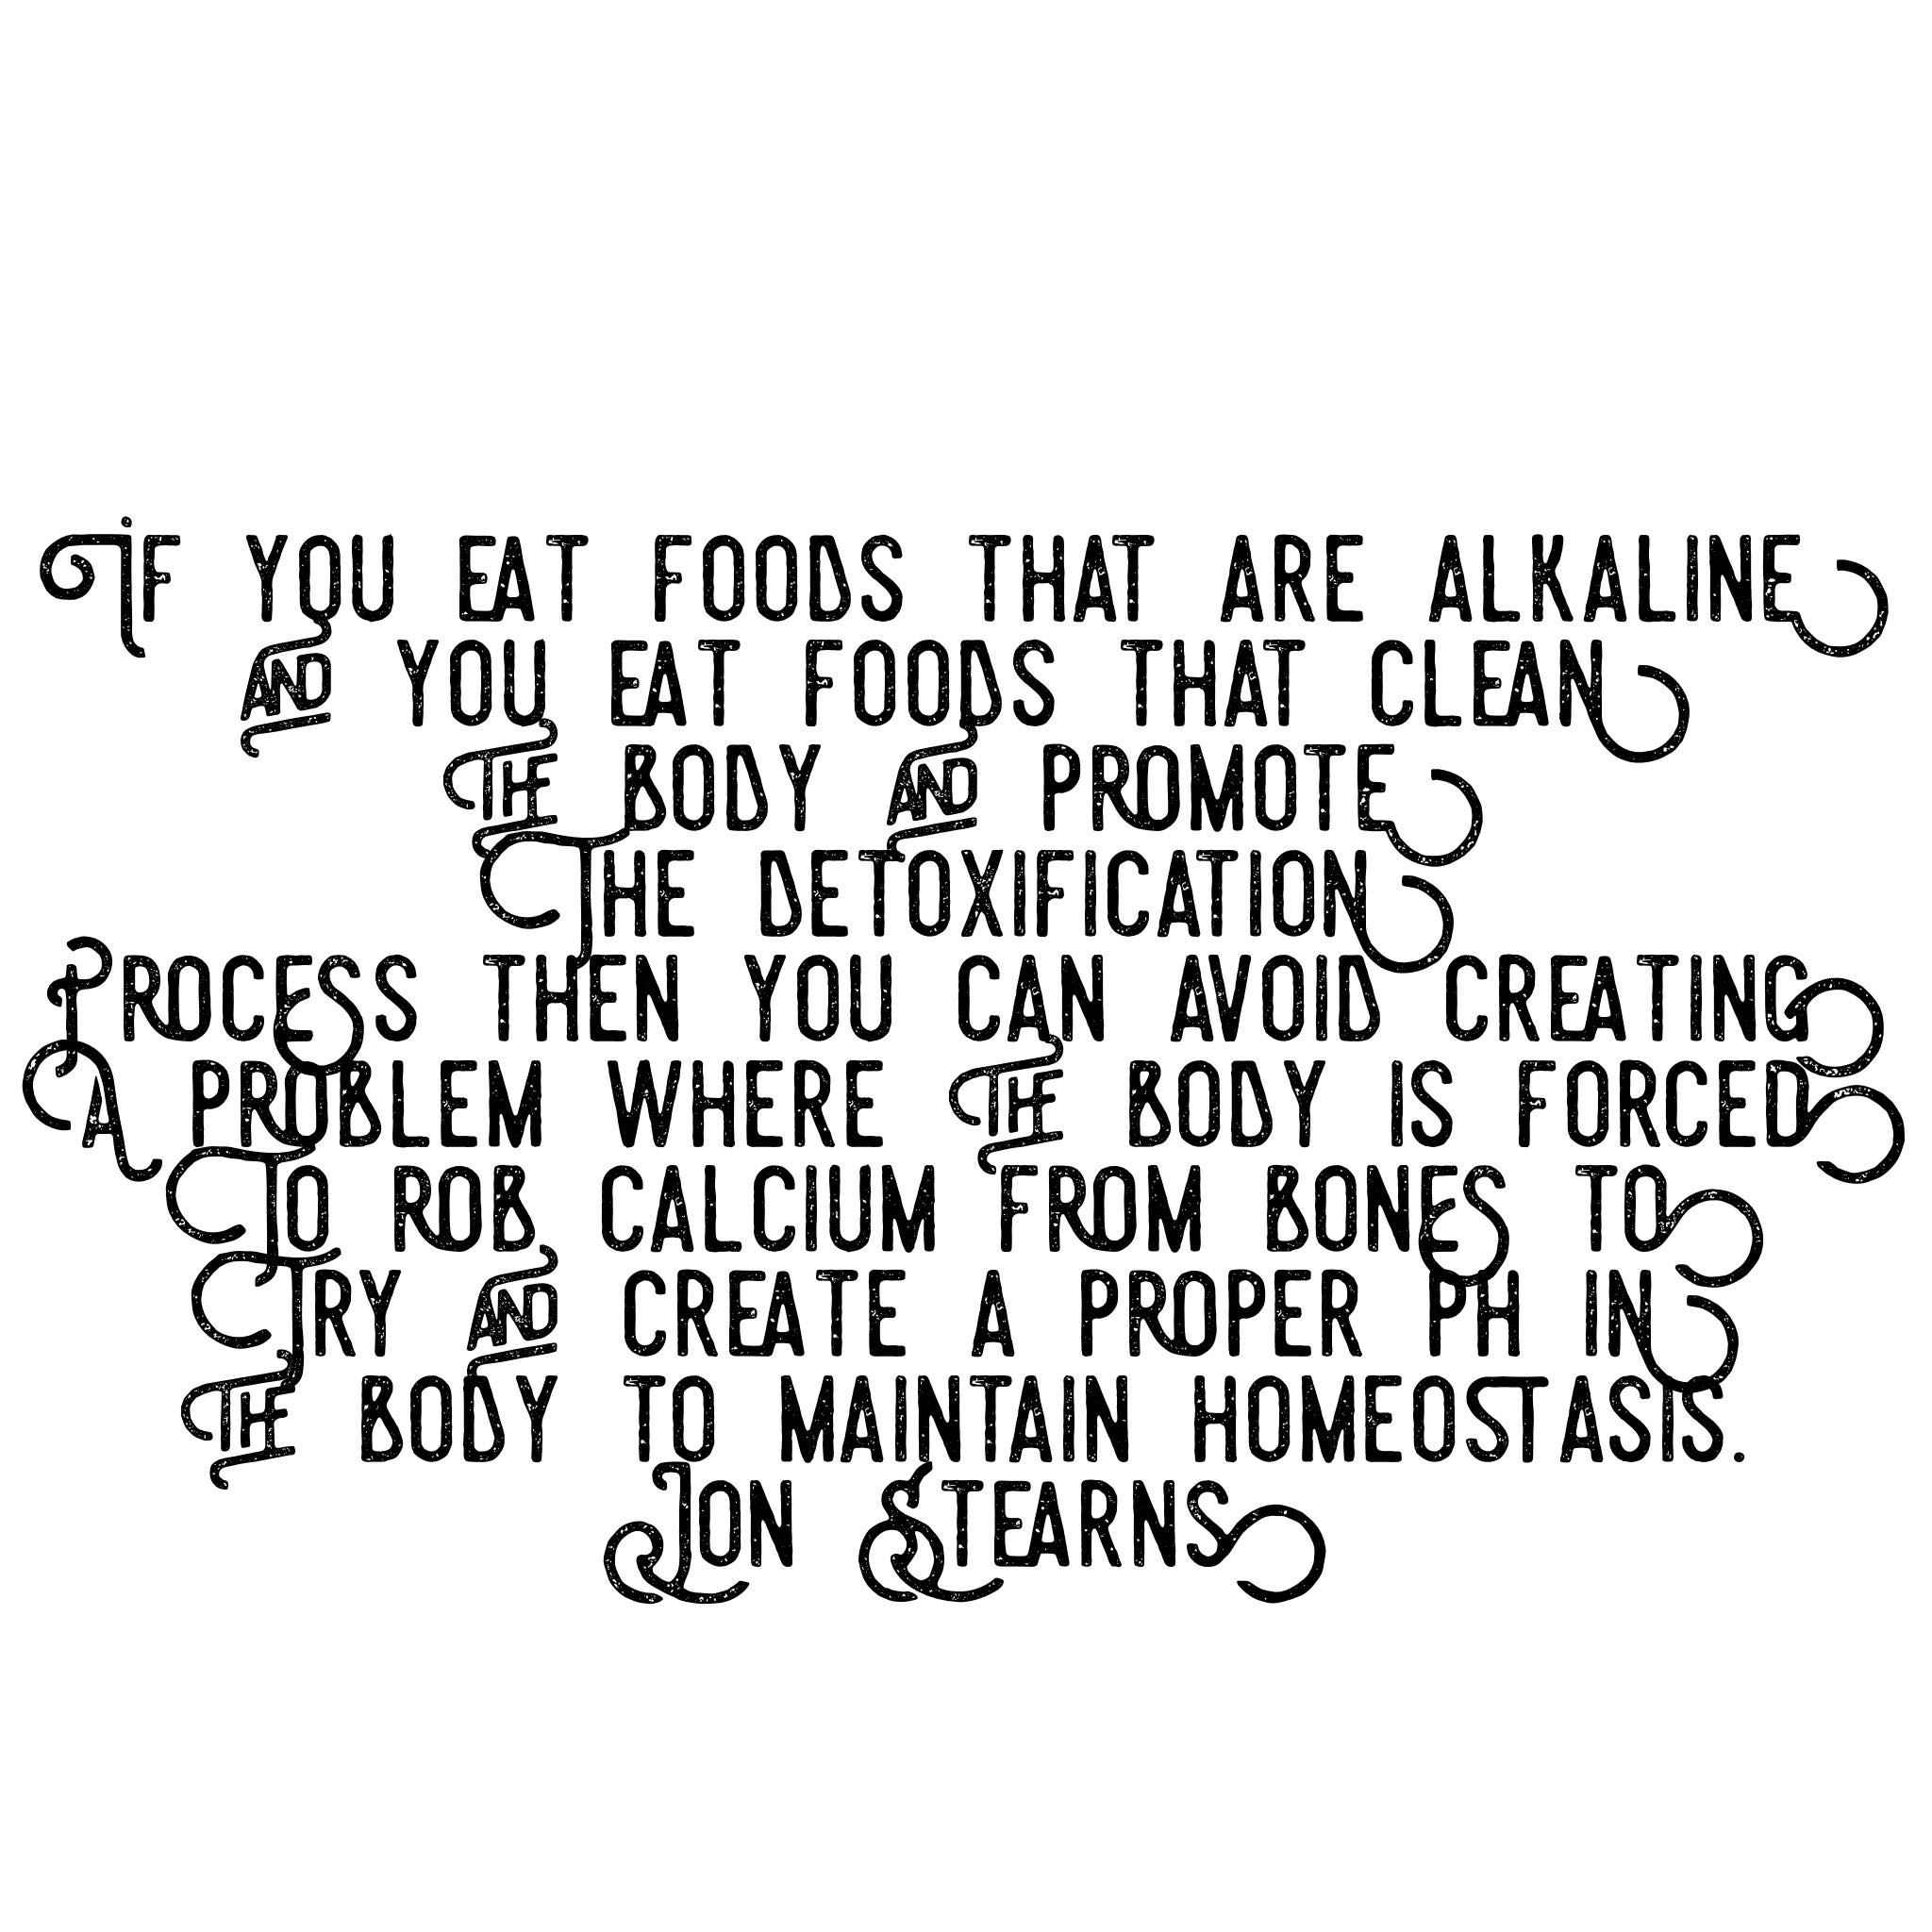 Acidic foods pull calcium out of the body